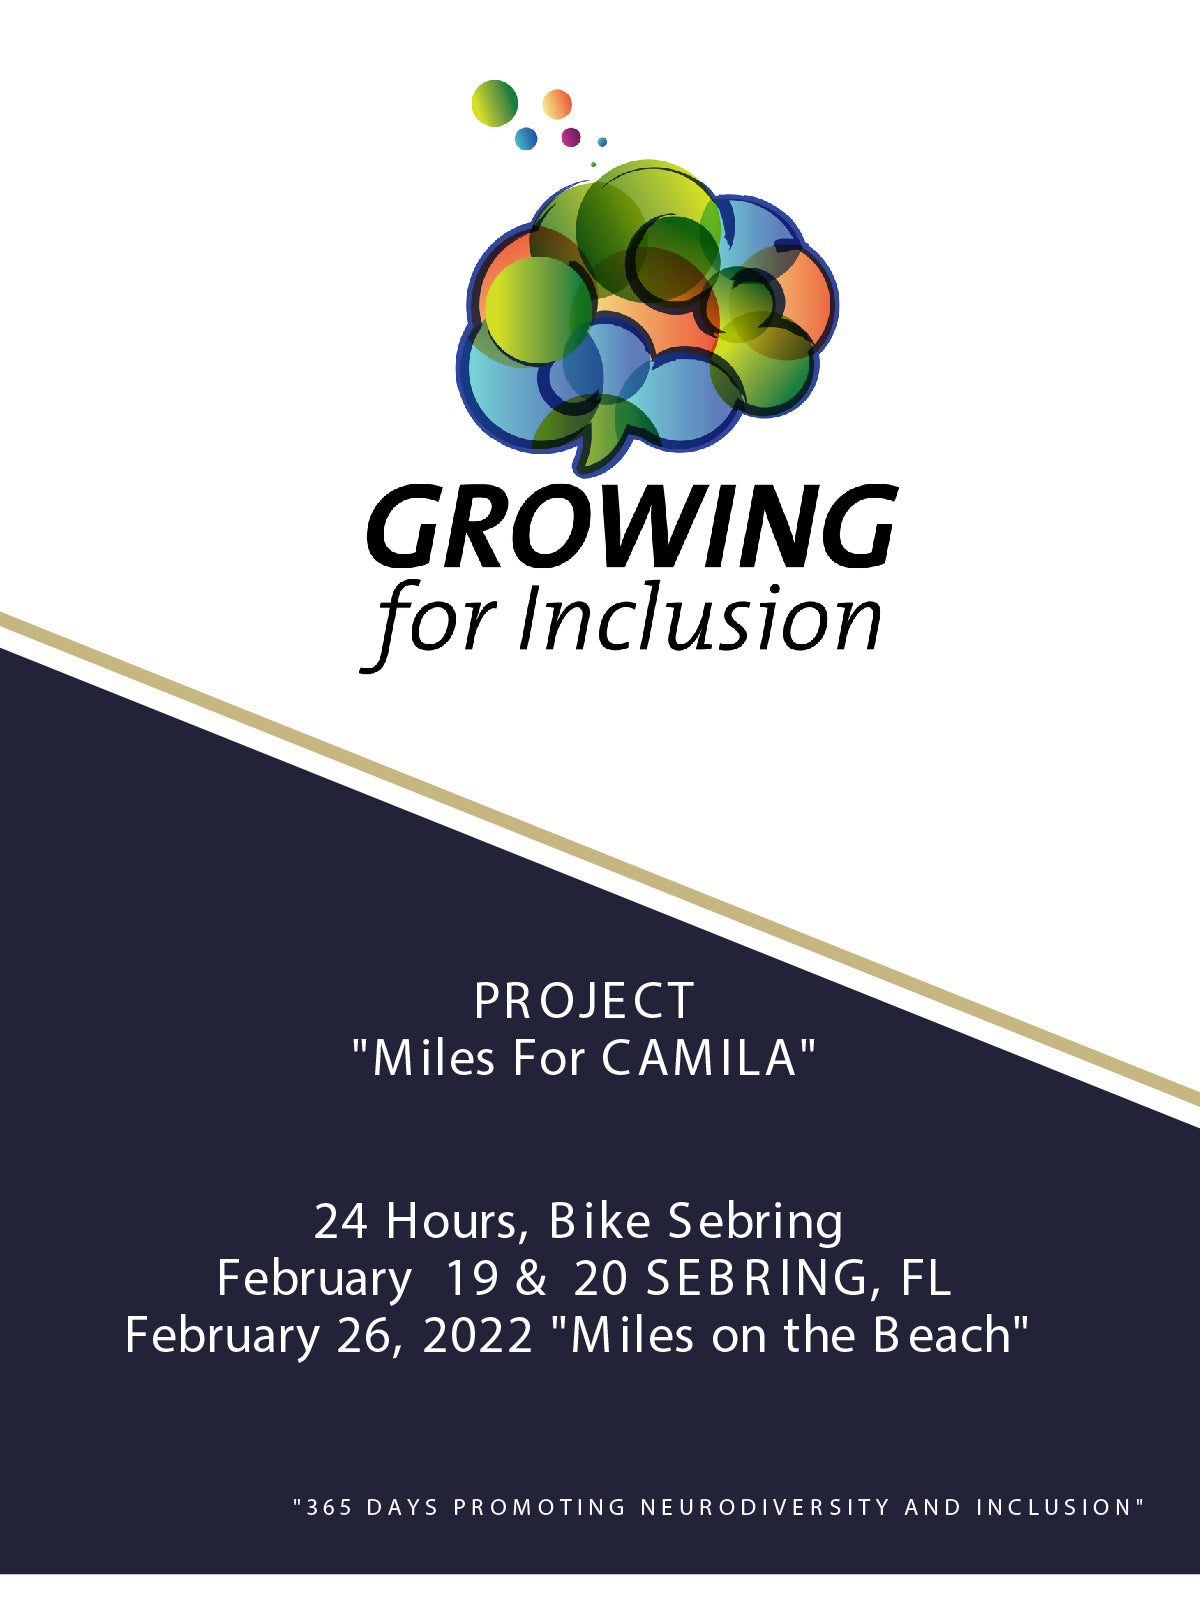 Miles for Camila 2022, cycling events, cycling competition